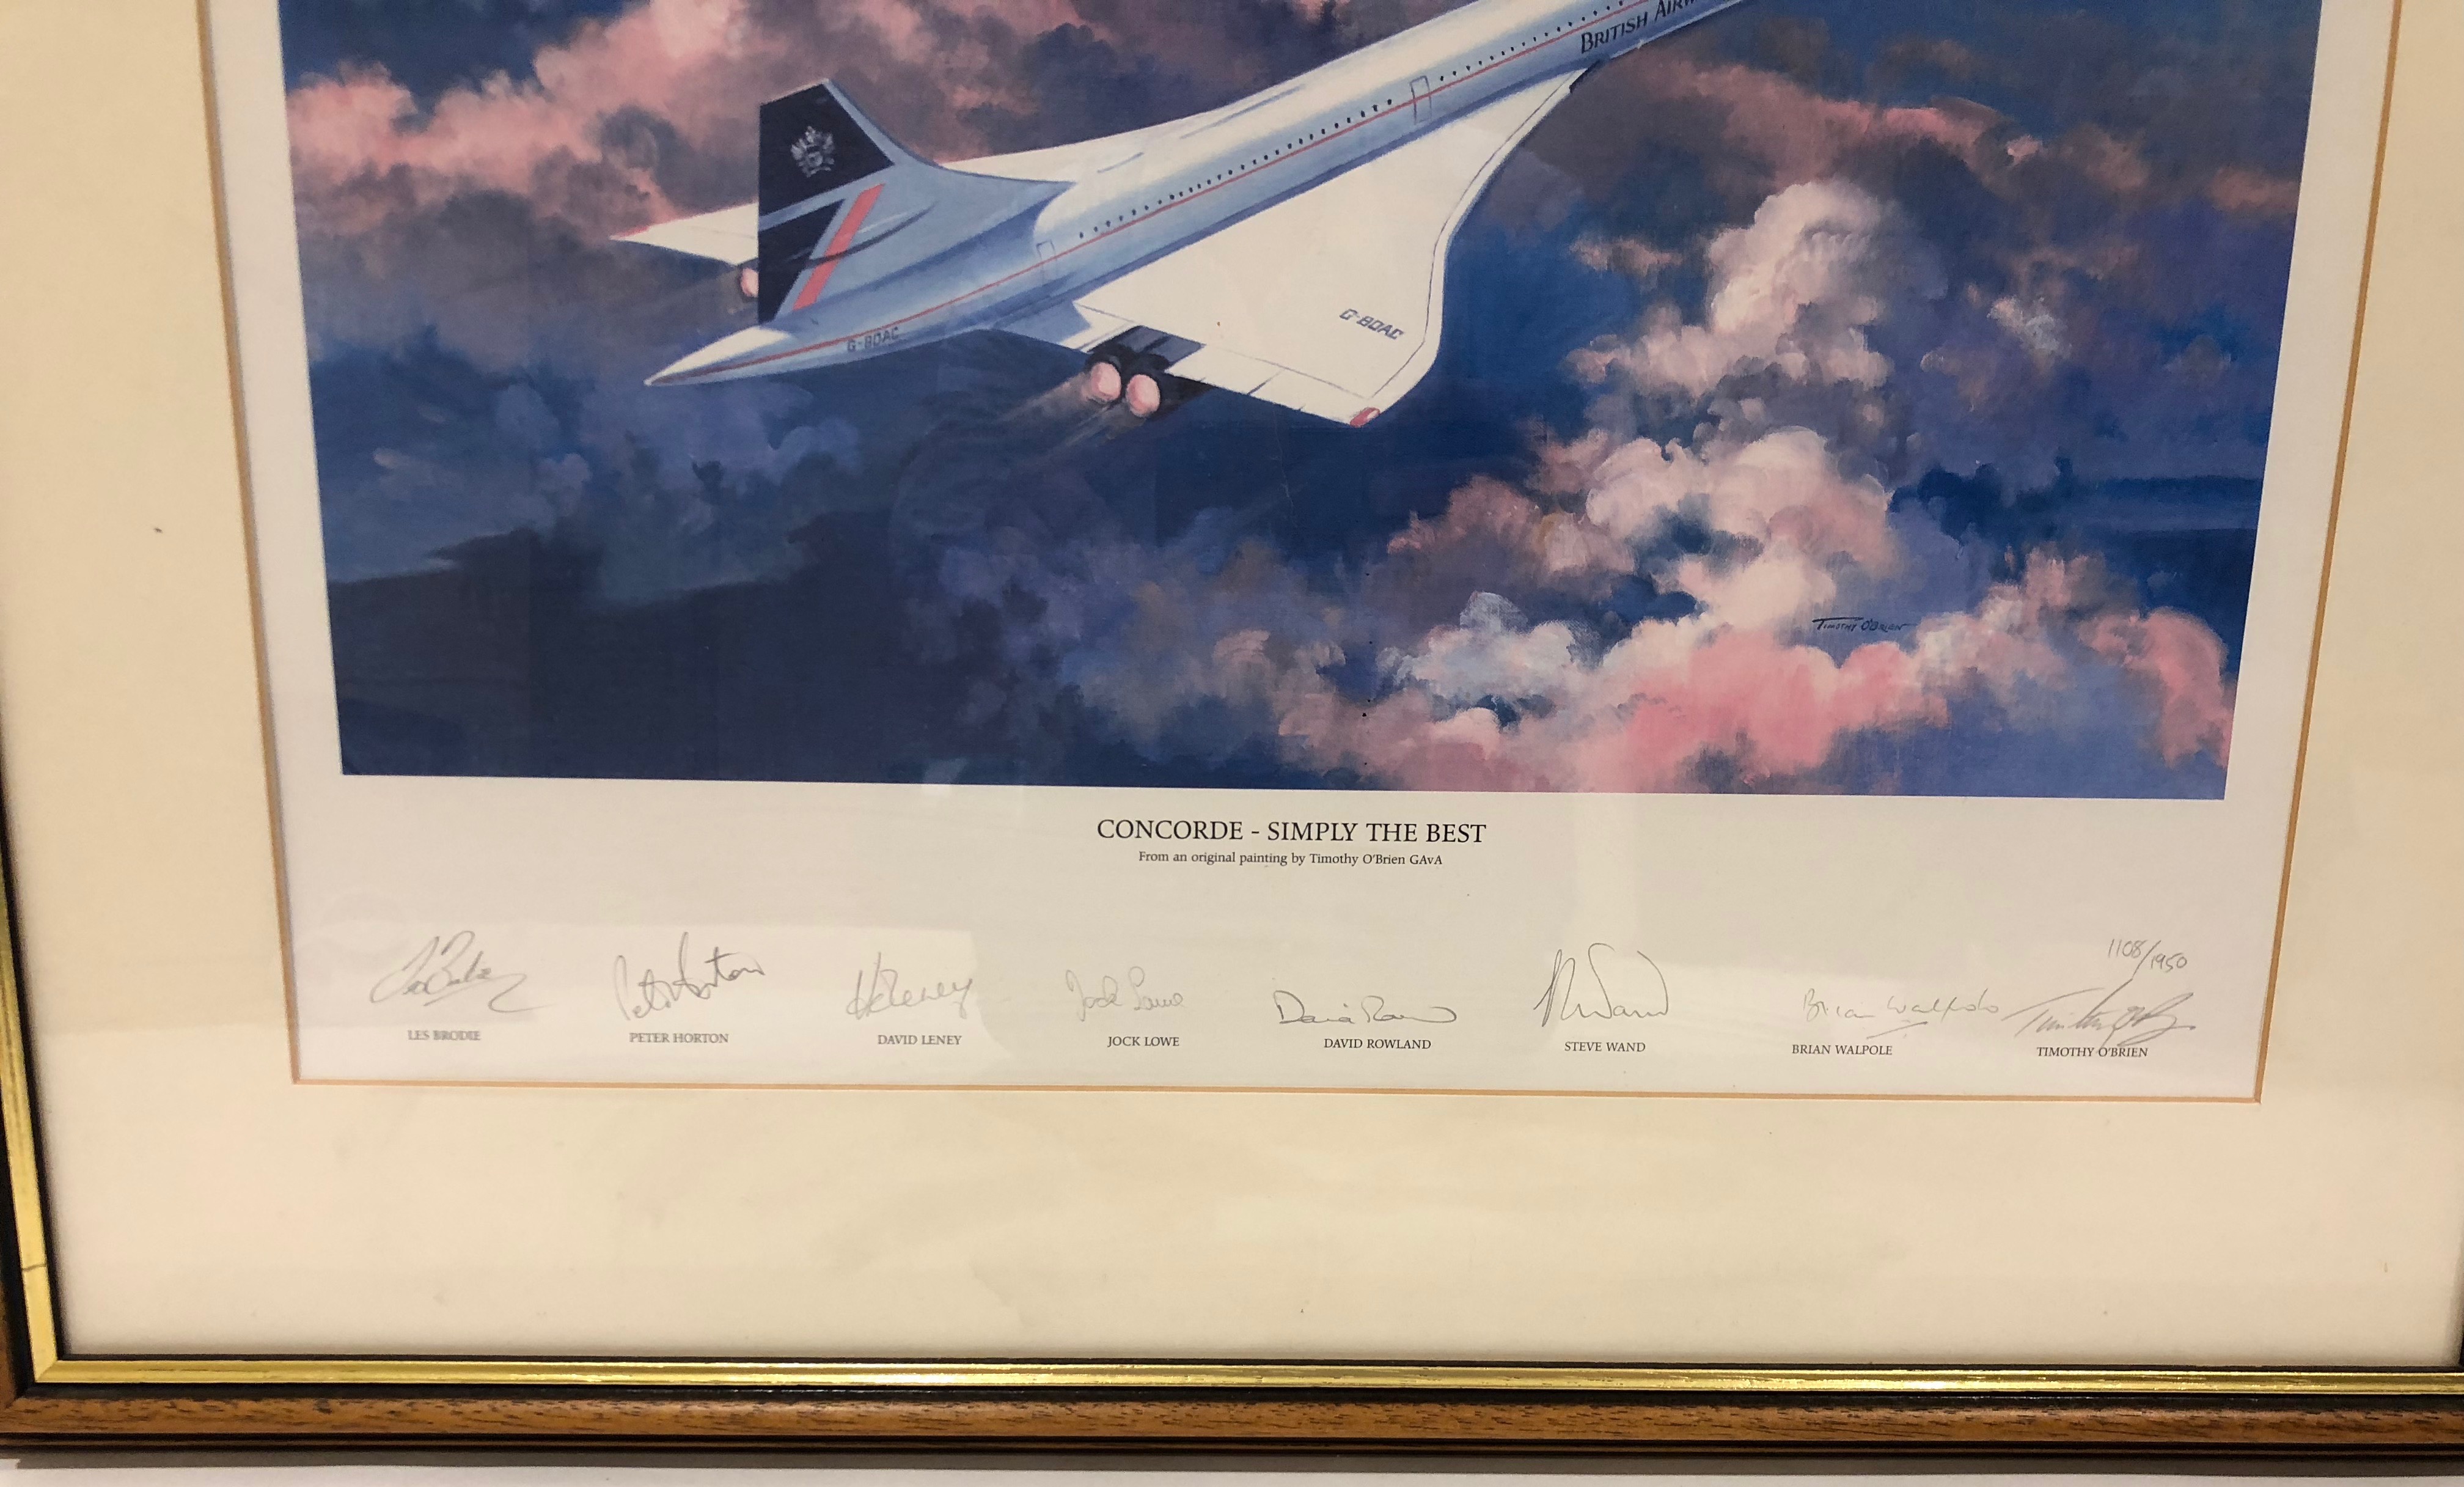 British Airways Concorde Signed Print 'Concorde Simply The Best' - Image 2 of 2